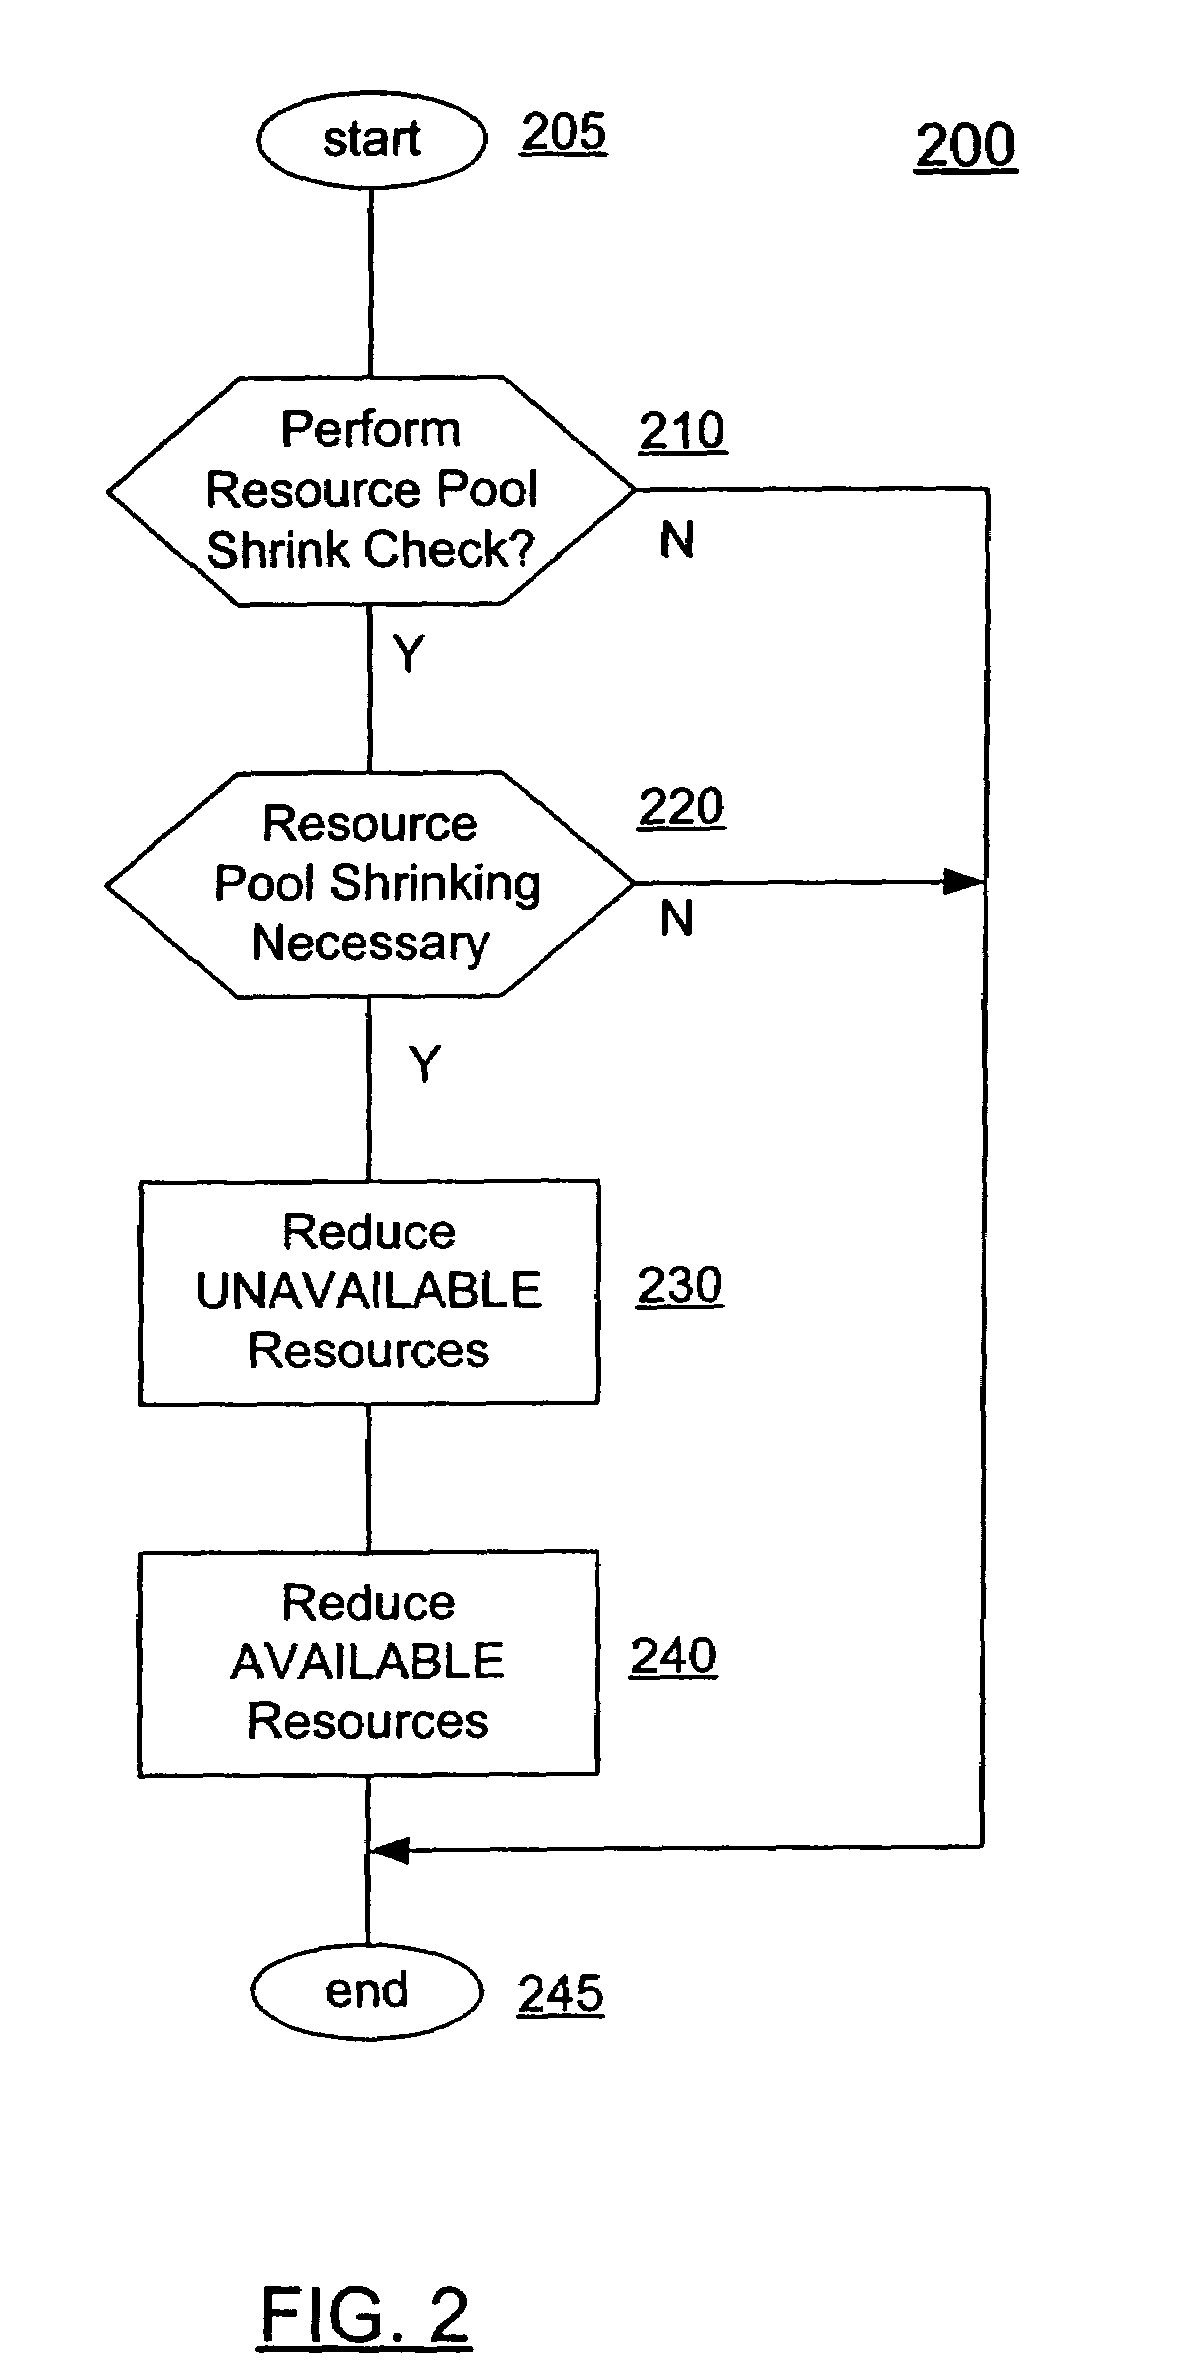 Method and system for performing resource pool maintenance by refreshing resources based on the pool resource test